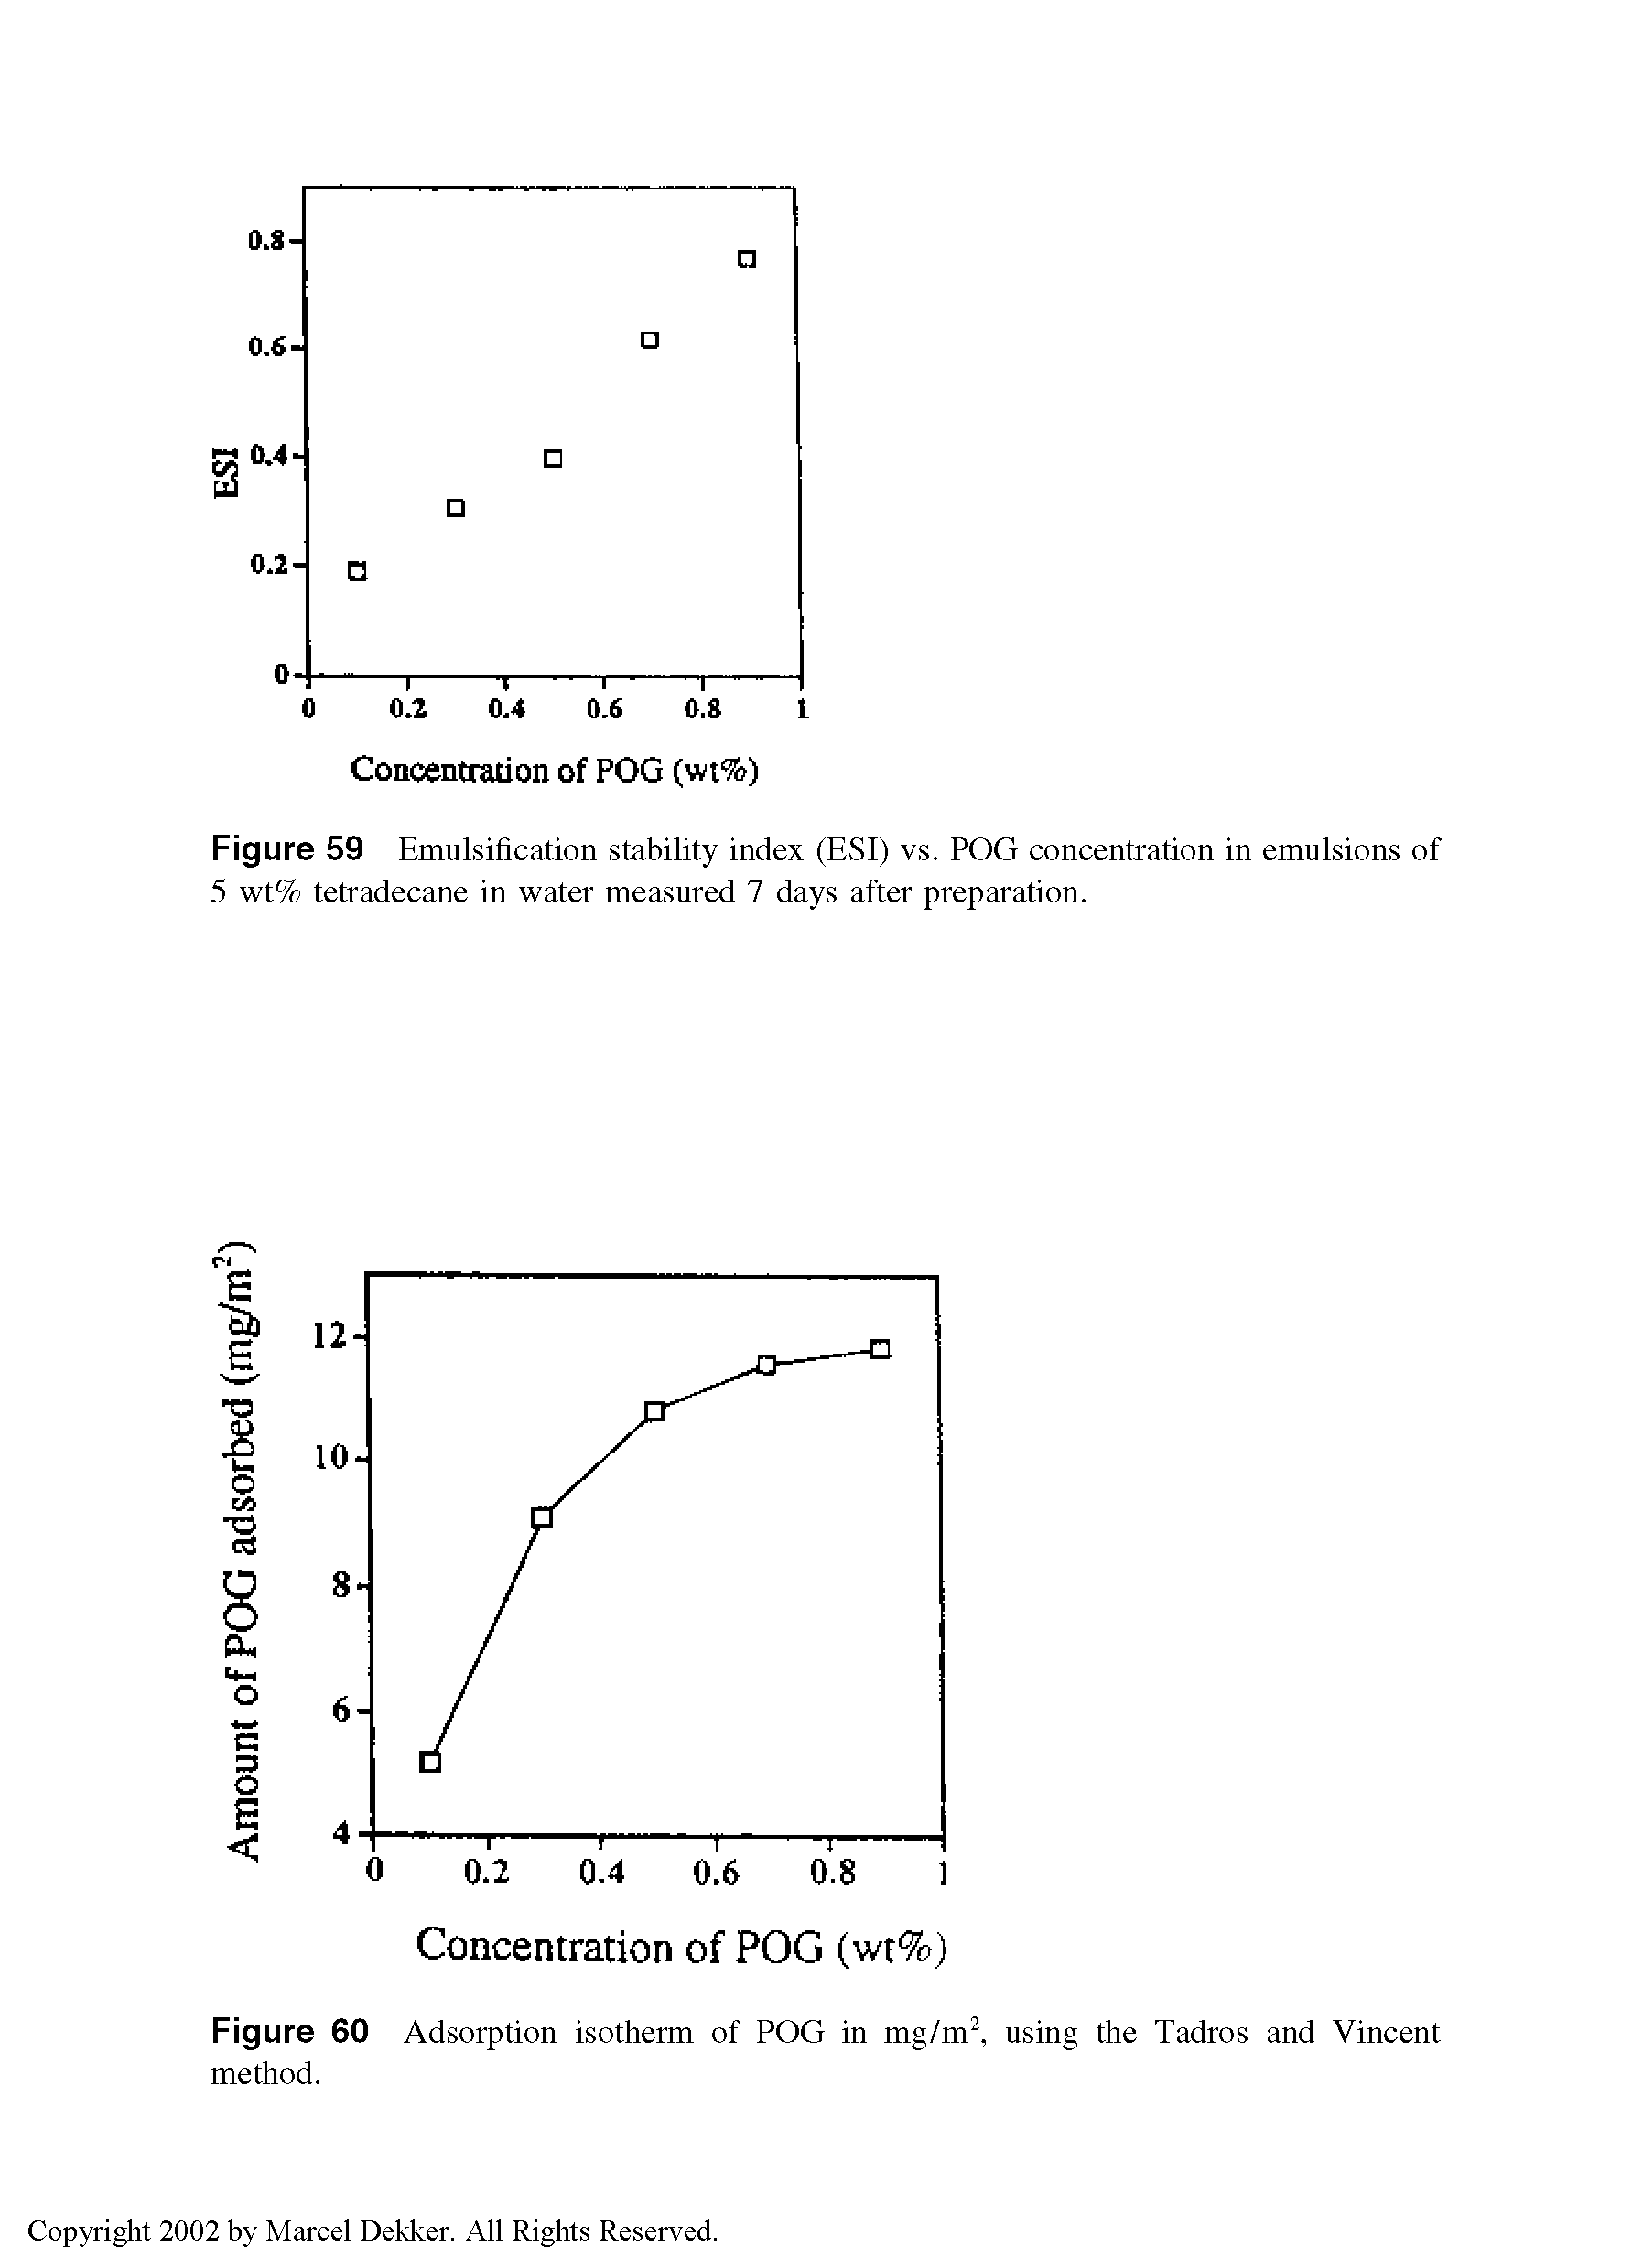 Figure 59 Emulsification stability index (ESI) vs. POG concentration in emulsions of 5 wt% tetradecane in water measured 7 days after preparation.